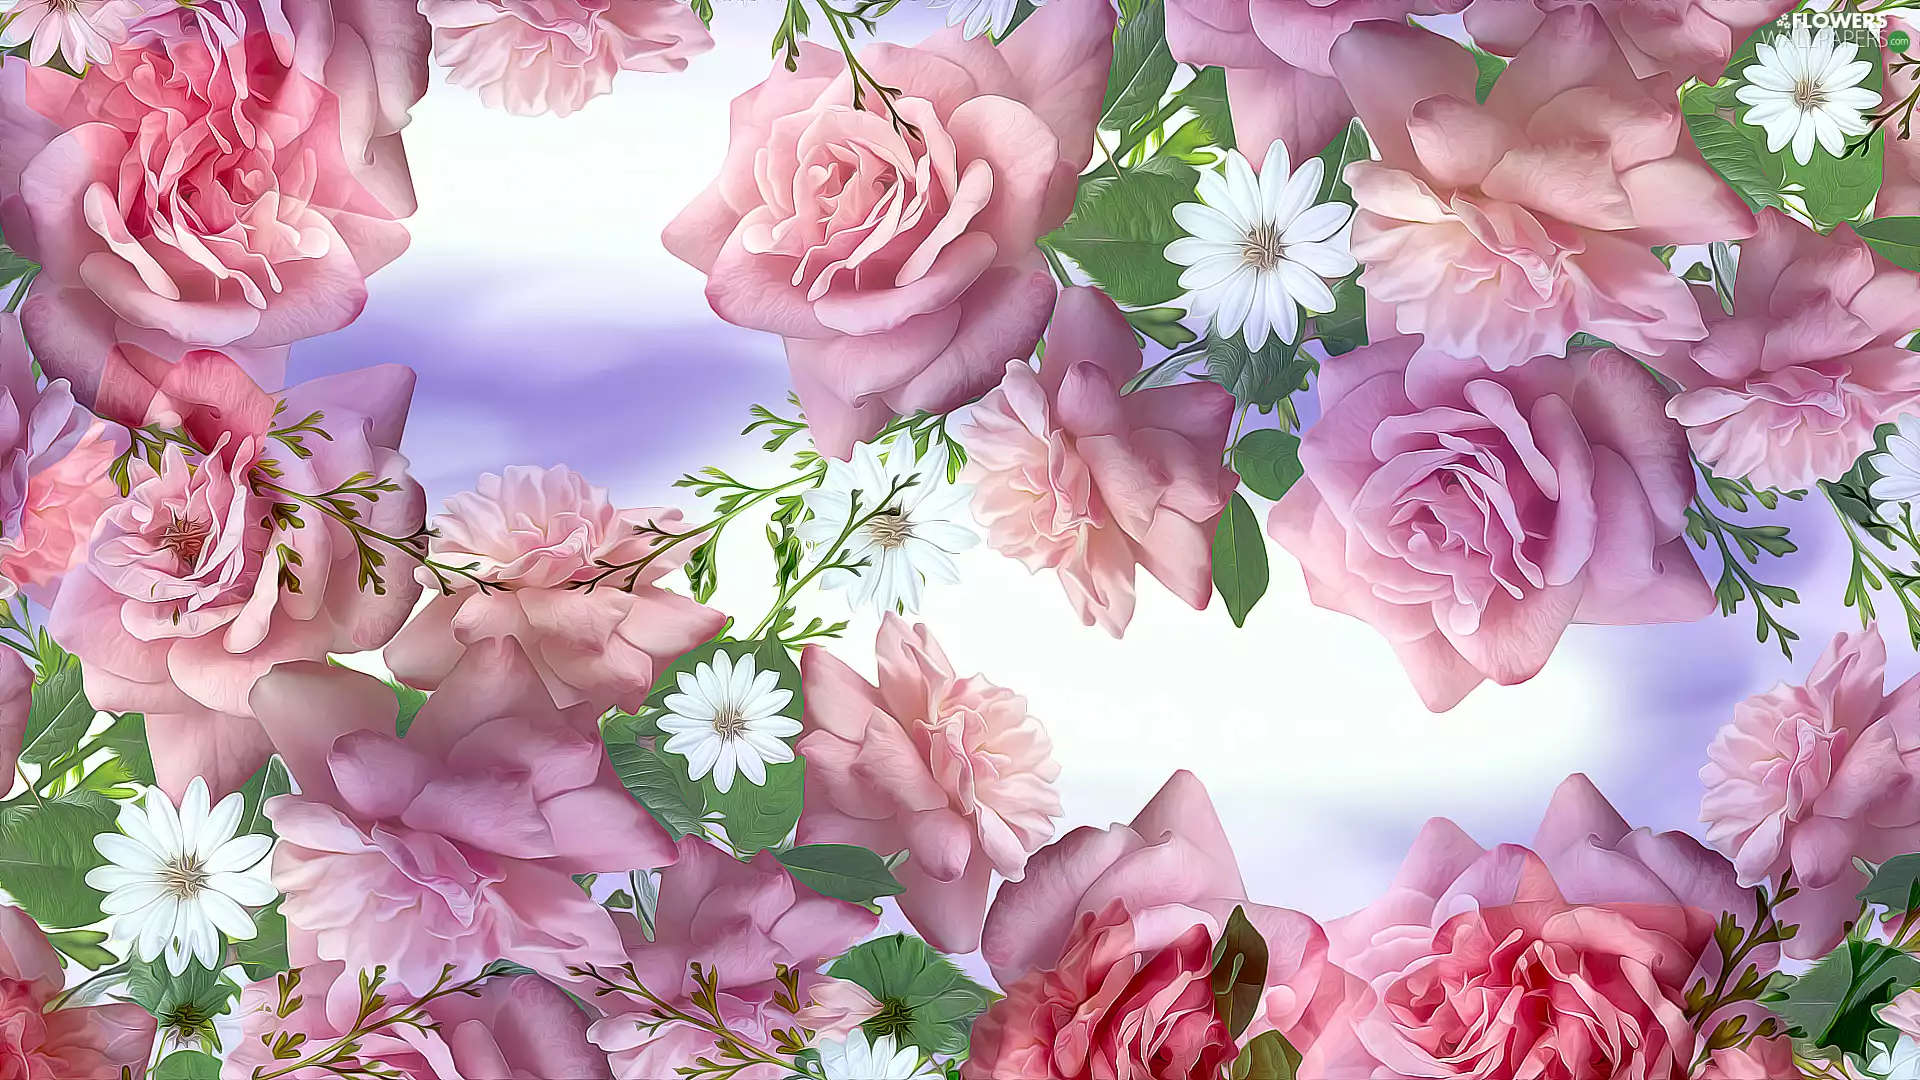 roses, Flowers, flowers, graphics, White, Pink